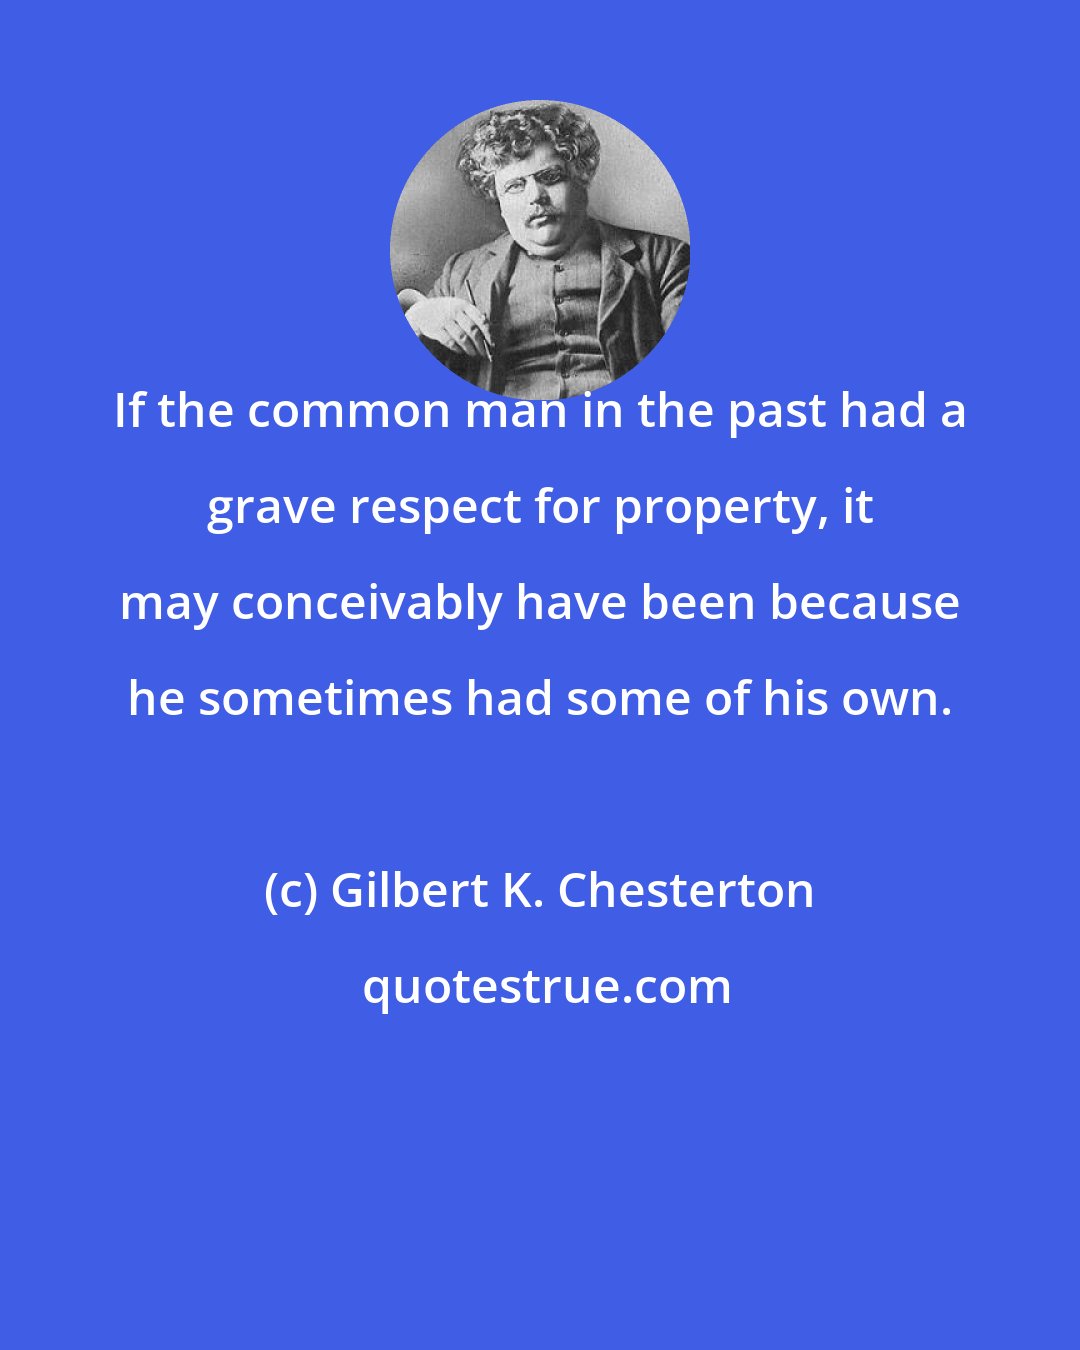 Gilbert K. Chesterton: If the common man in the past had a grave respect for property, it may conceivably have been because he sometimes had some of his own.